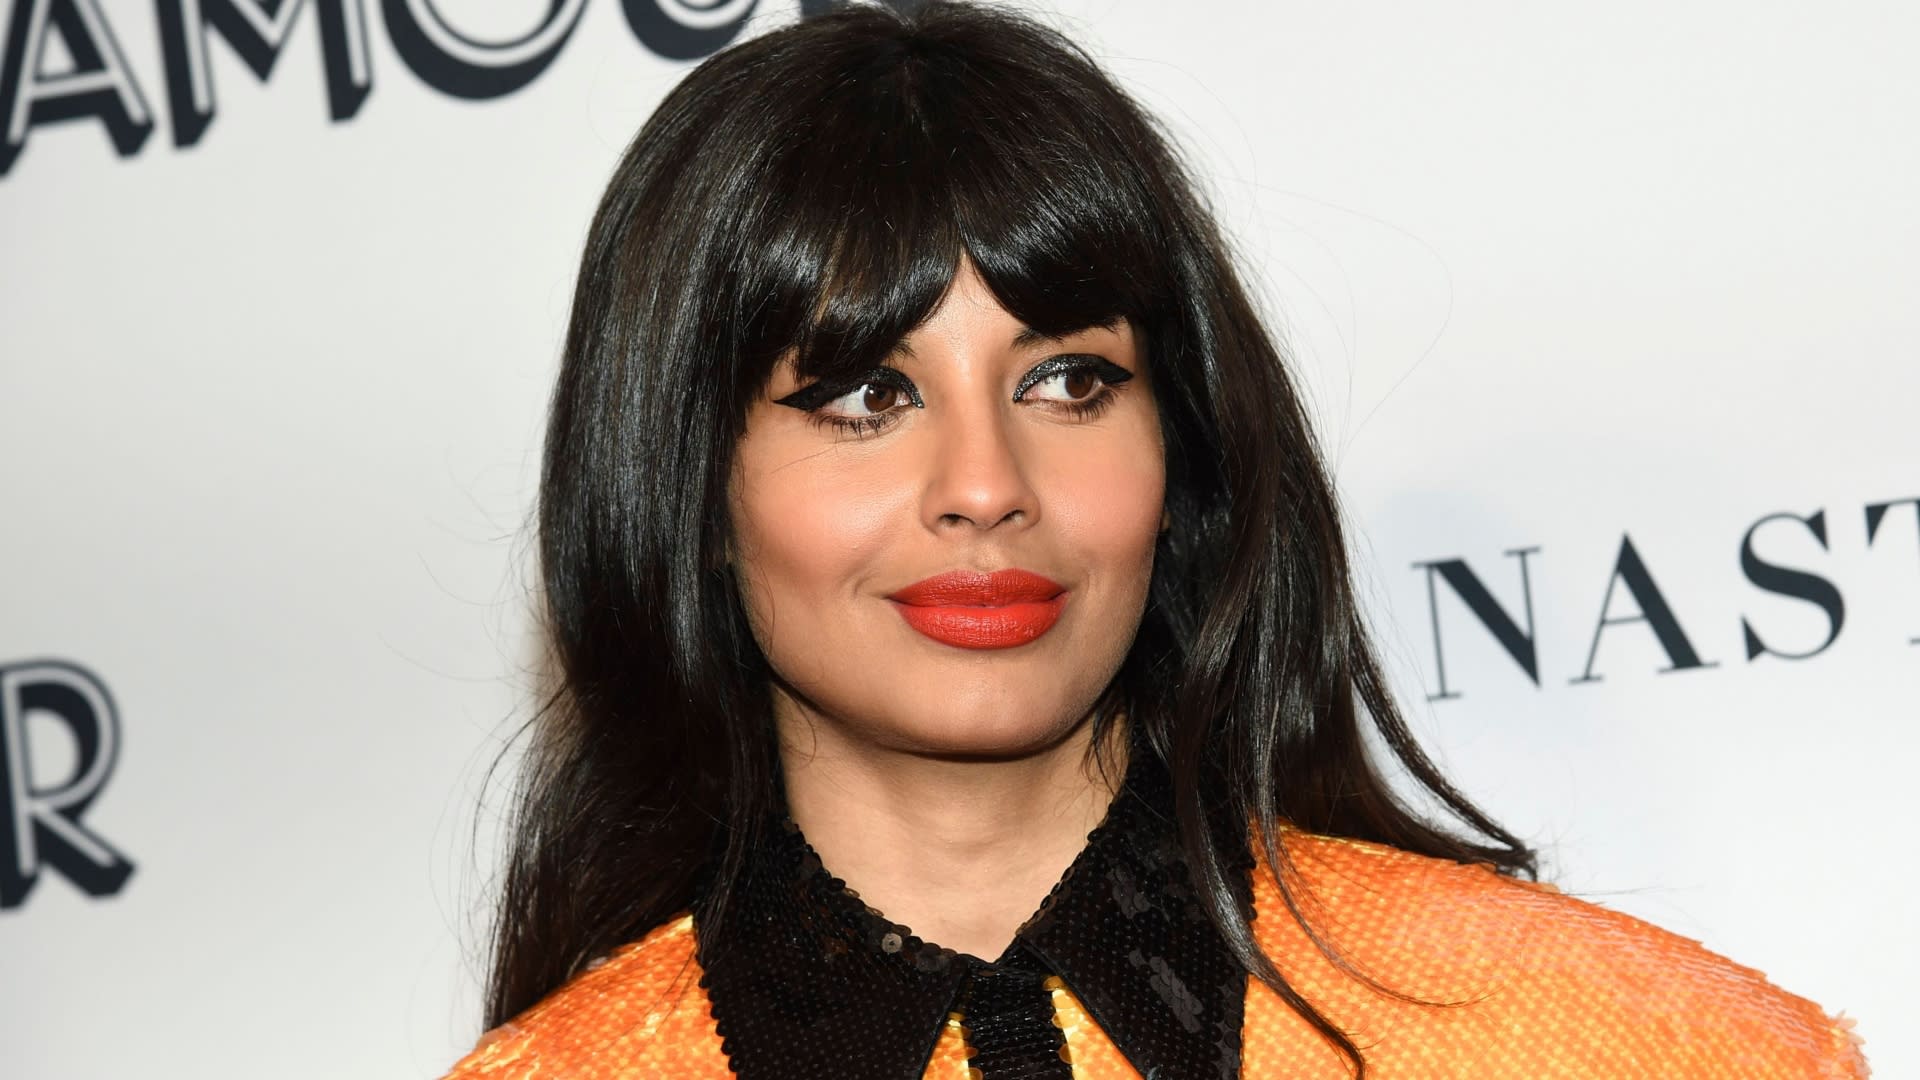 Jameela Jamil Opens Up About Her Health Issues And Why She Fights So Hard For Body Neutrality